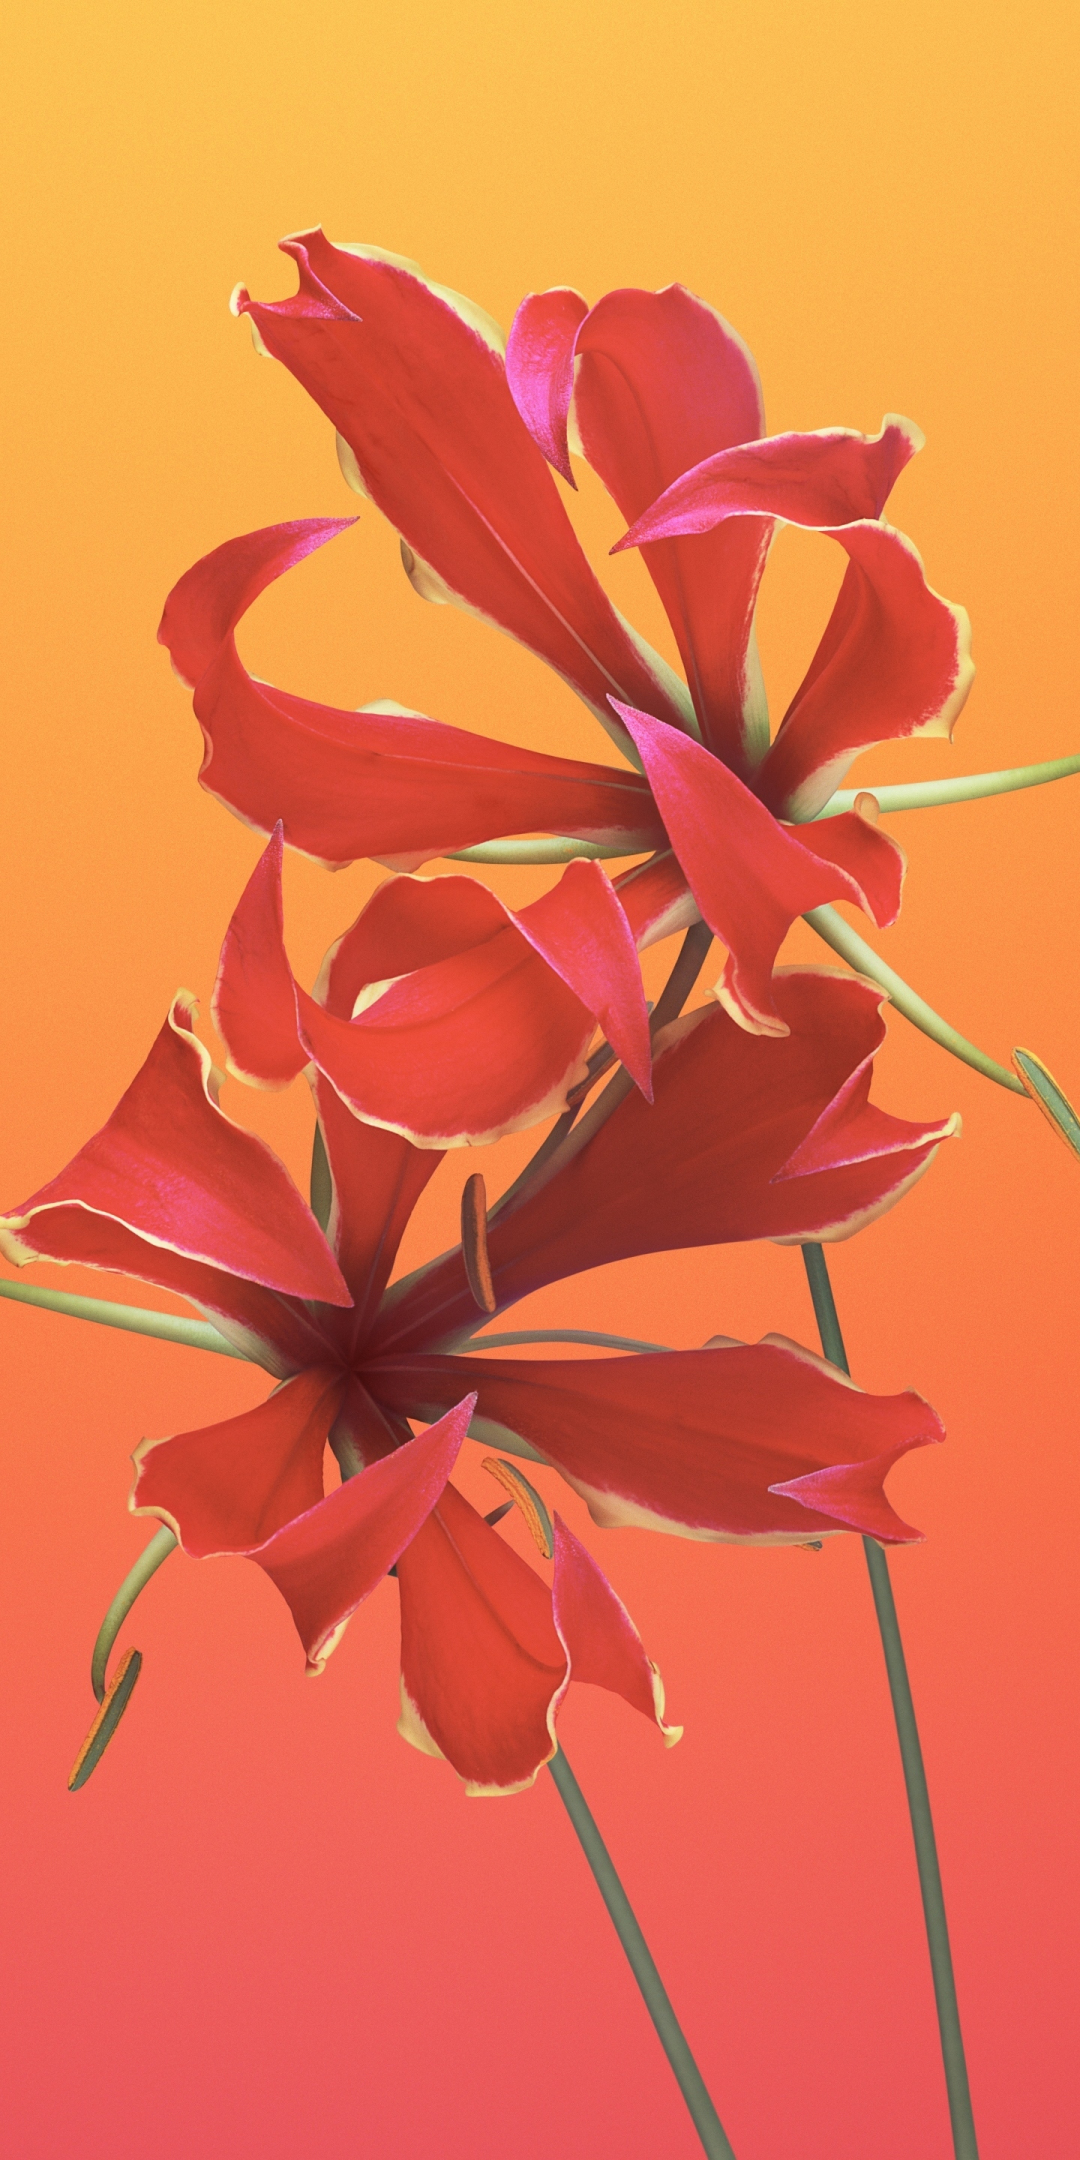 Lily flower, macOs Mojave iOS, 11 stock, 1080x2160 wallpaper